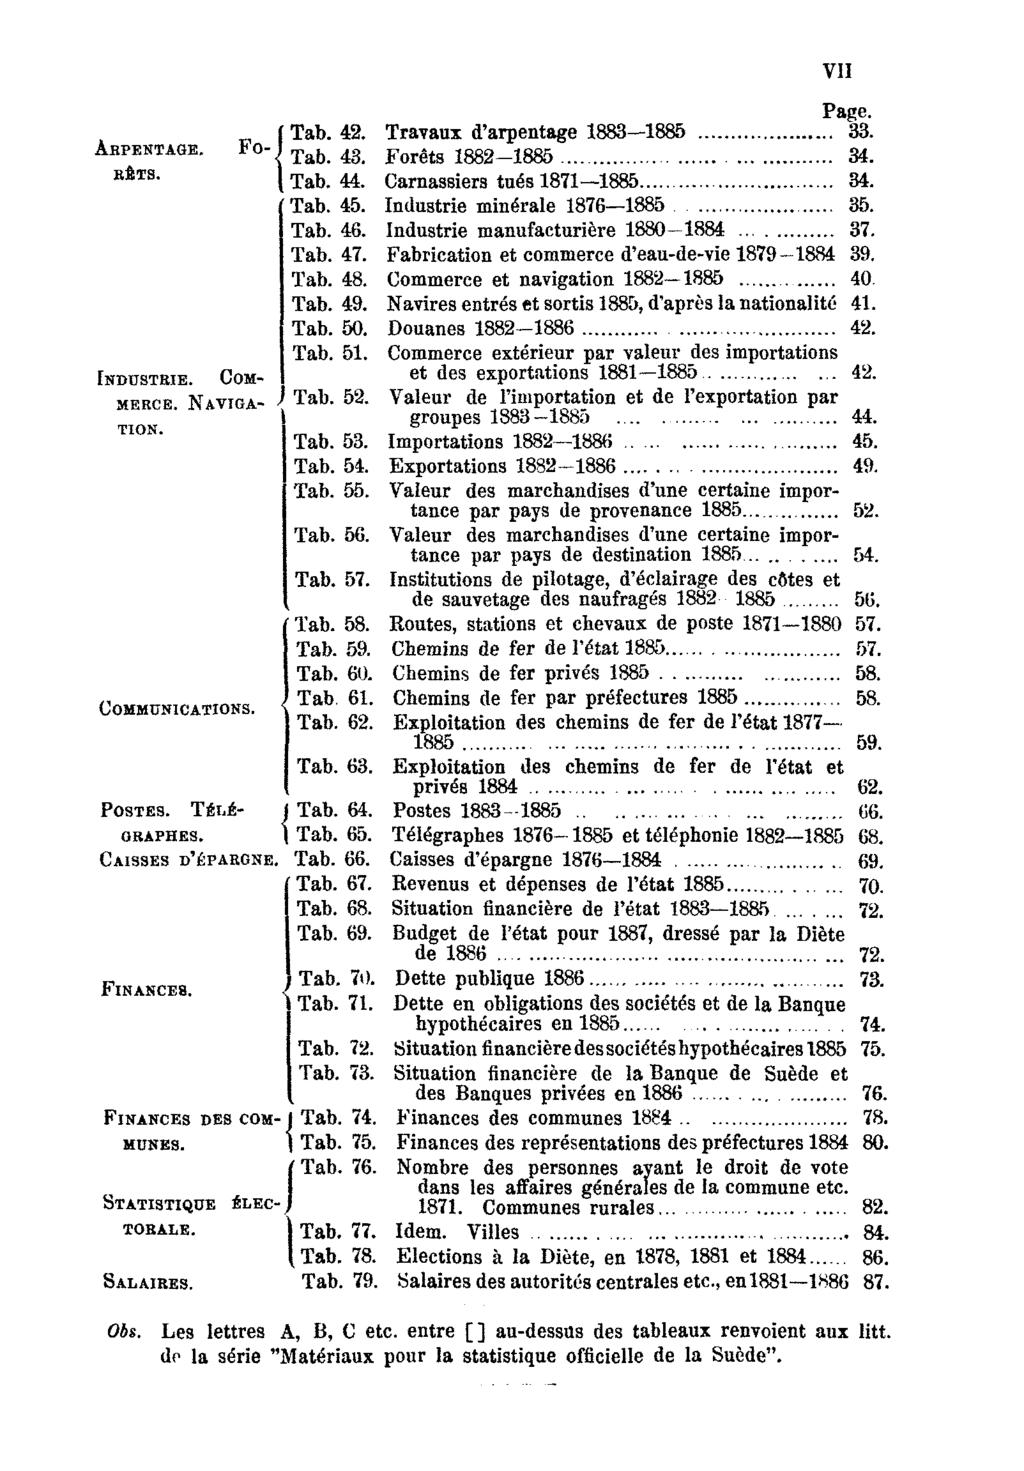 Arpentage. Forêts. Industrie. Commerce. Navigation. Communications. VII Page. Tab. 42. Travaux d'arpentage 1883 1885 33. Tab. 43. Forêts 1882 1885 34. Tab. 44. Carnassiers tués 1871 1885 34. Tab. 45.